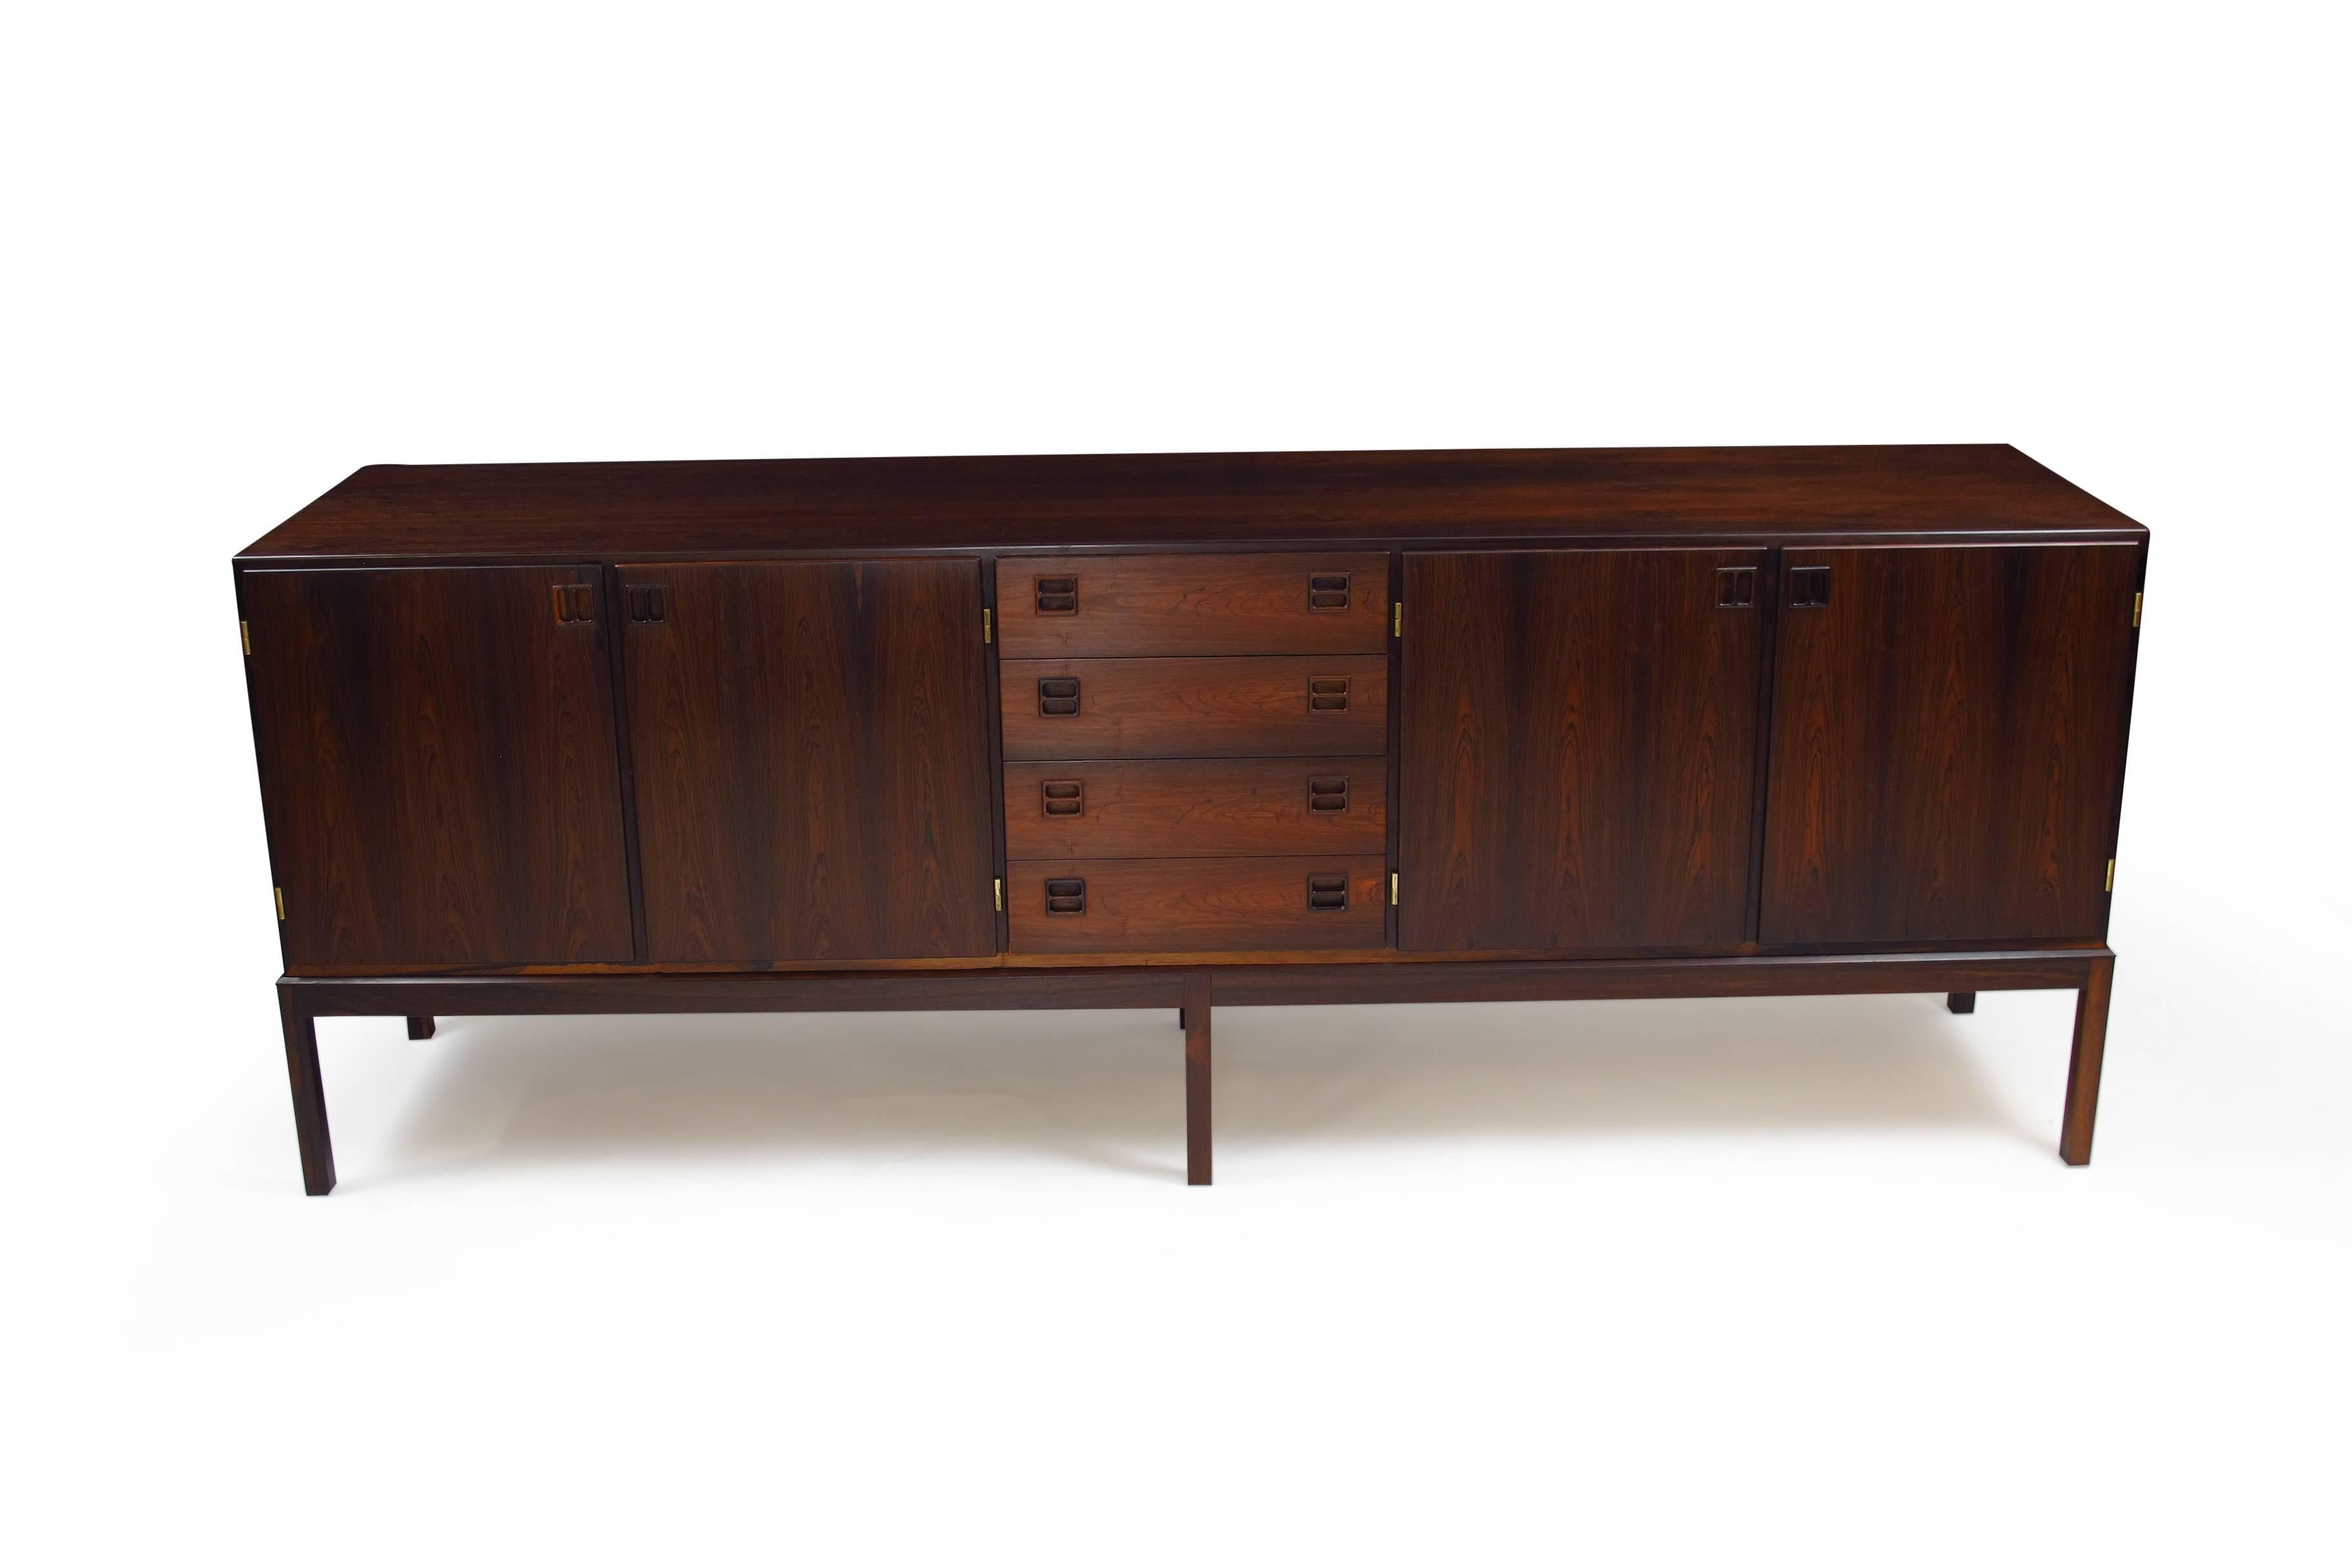 Mid-century Brazilian Rosewood credenzaDesigned by Johannes Andersen for Bernhard Pedersen & Son, Denmark. Model 160, features dark Brazilian rosewood with book-matched grain and recessed square pulls. The cabinet has four drawers in center, cabinet